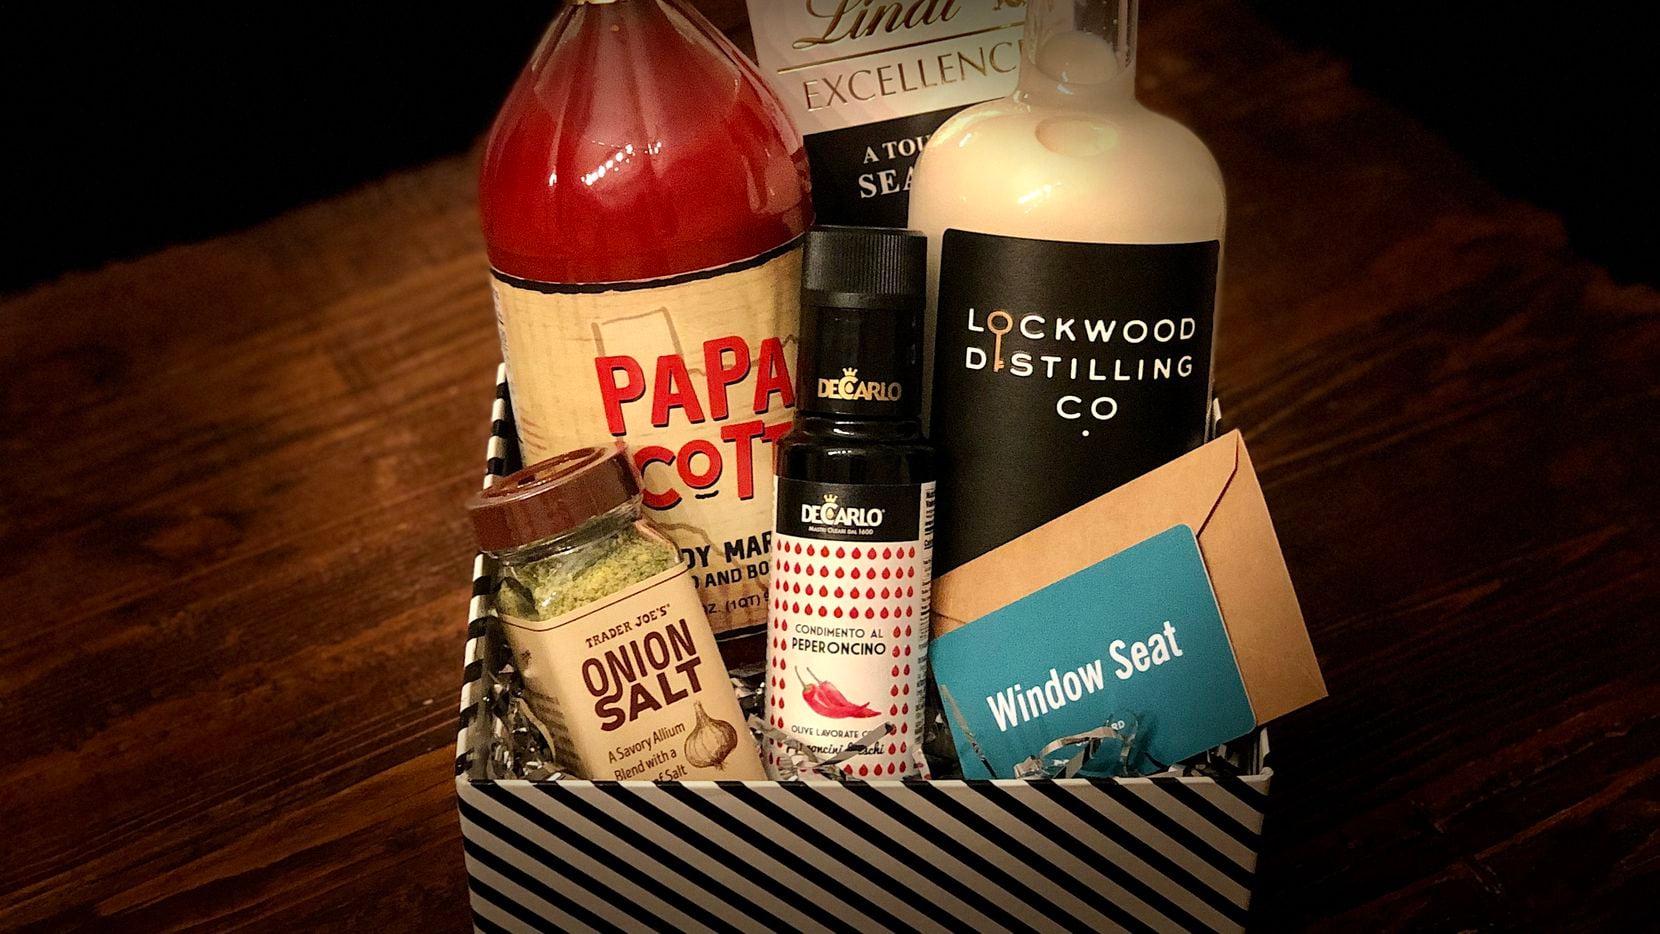 How do you assemble the perfect holiday gift basket? Fill it with a mix of local and not-local foodie finds. Sarah Blaskovich's 2021 holiday gift baskets are (from top left): Papa Scott's bloody Mary mix; Lindt's "a touch of sea salt" chocolate; Lockwood Distilling Co.'s bourbon cream liqueur; a gift certificate to a locally-owned restaurant or coffee shop, like Window Seat in East Dallas; a bougie bottle of spicy olive oil from Eataly; and a shaker of onion salt from Trader Joe's.